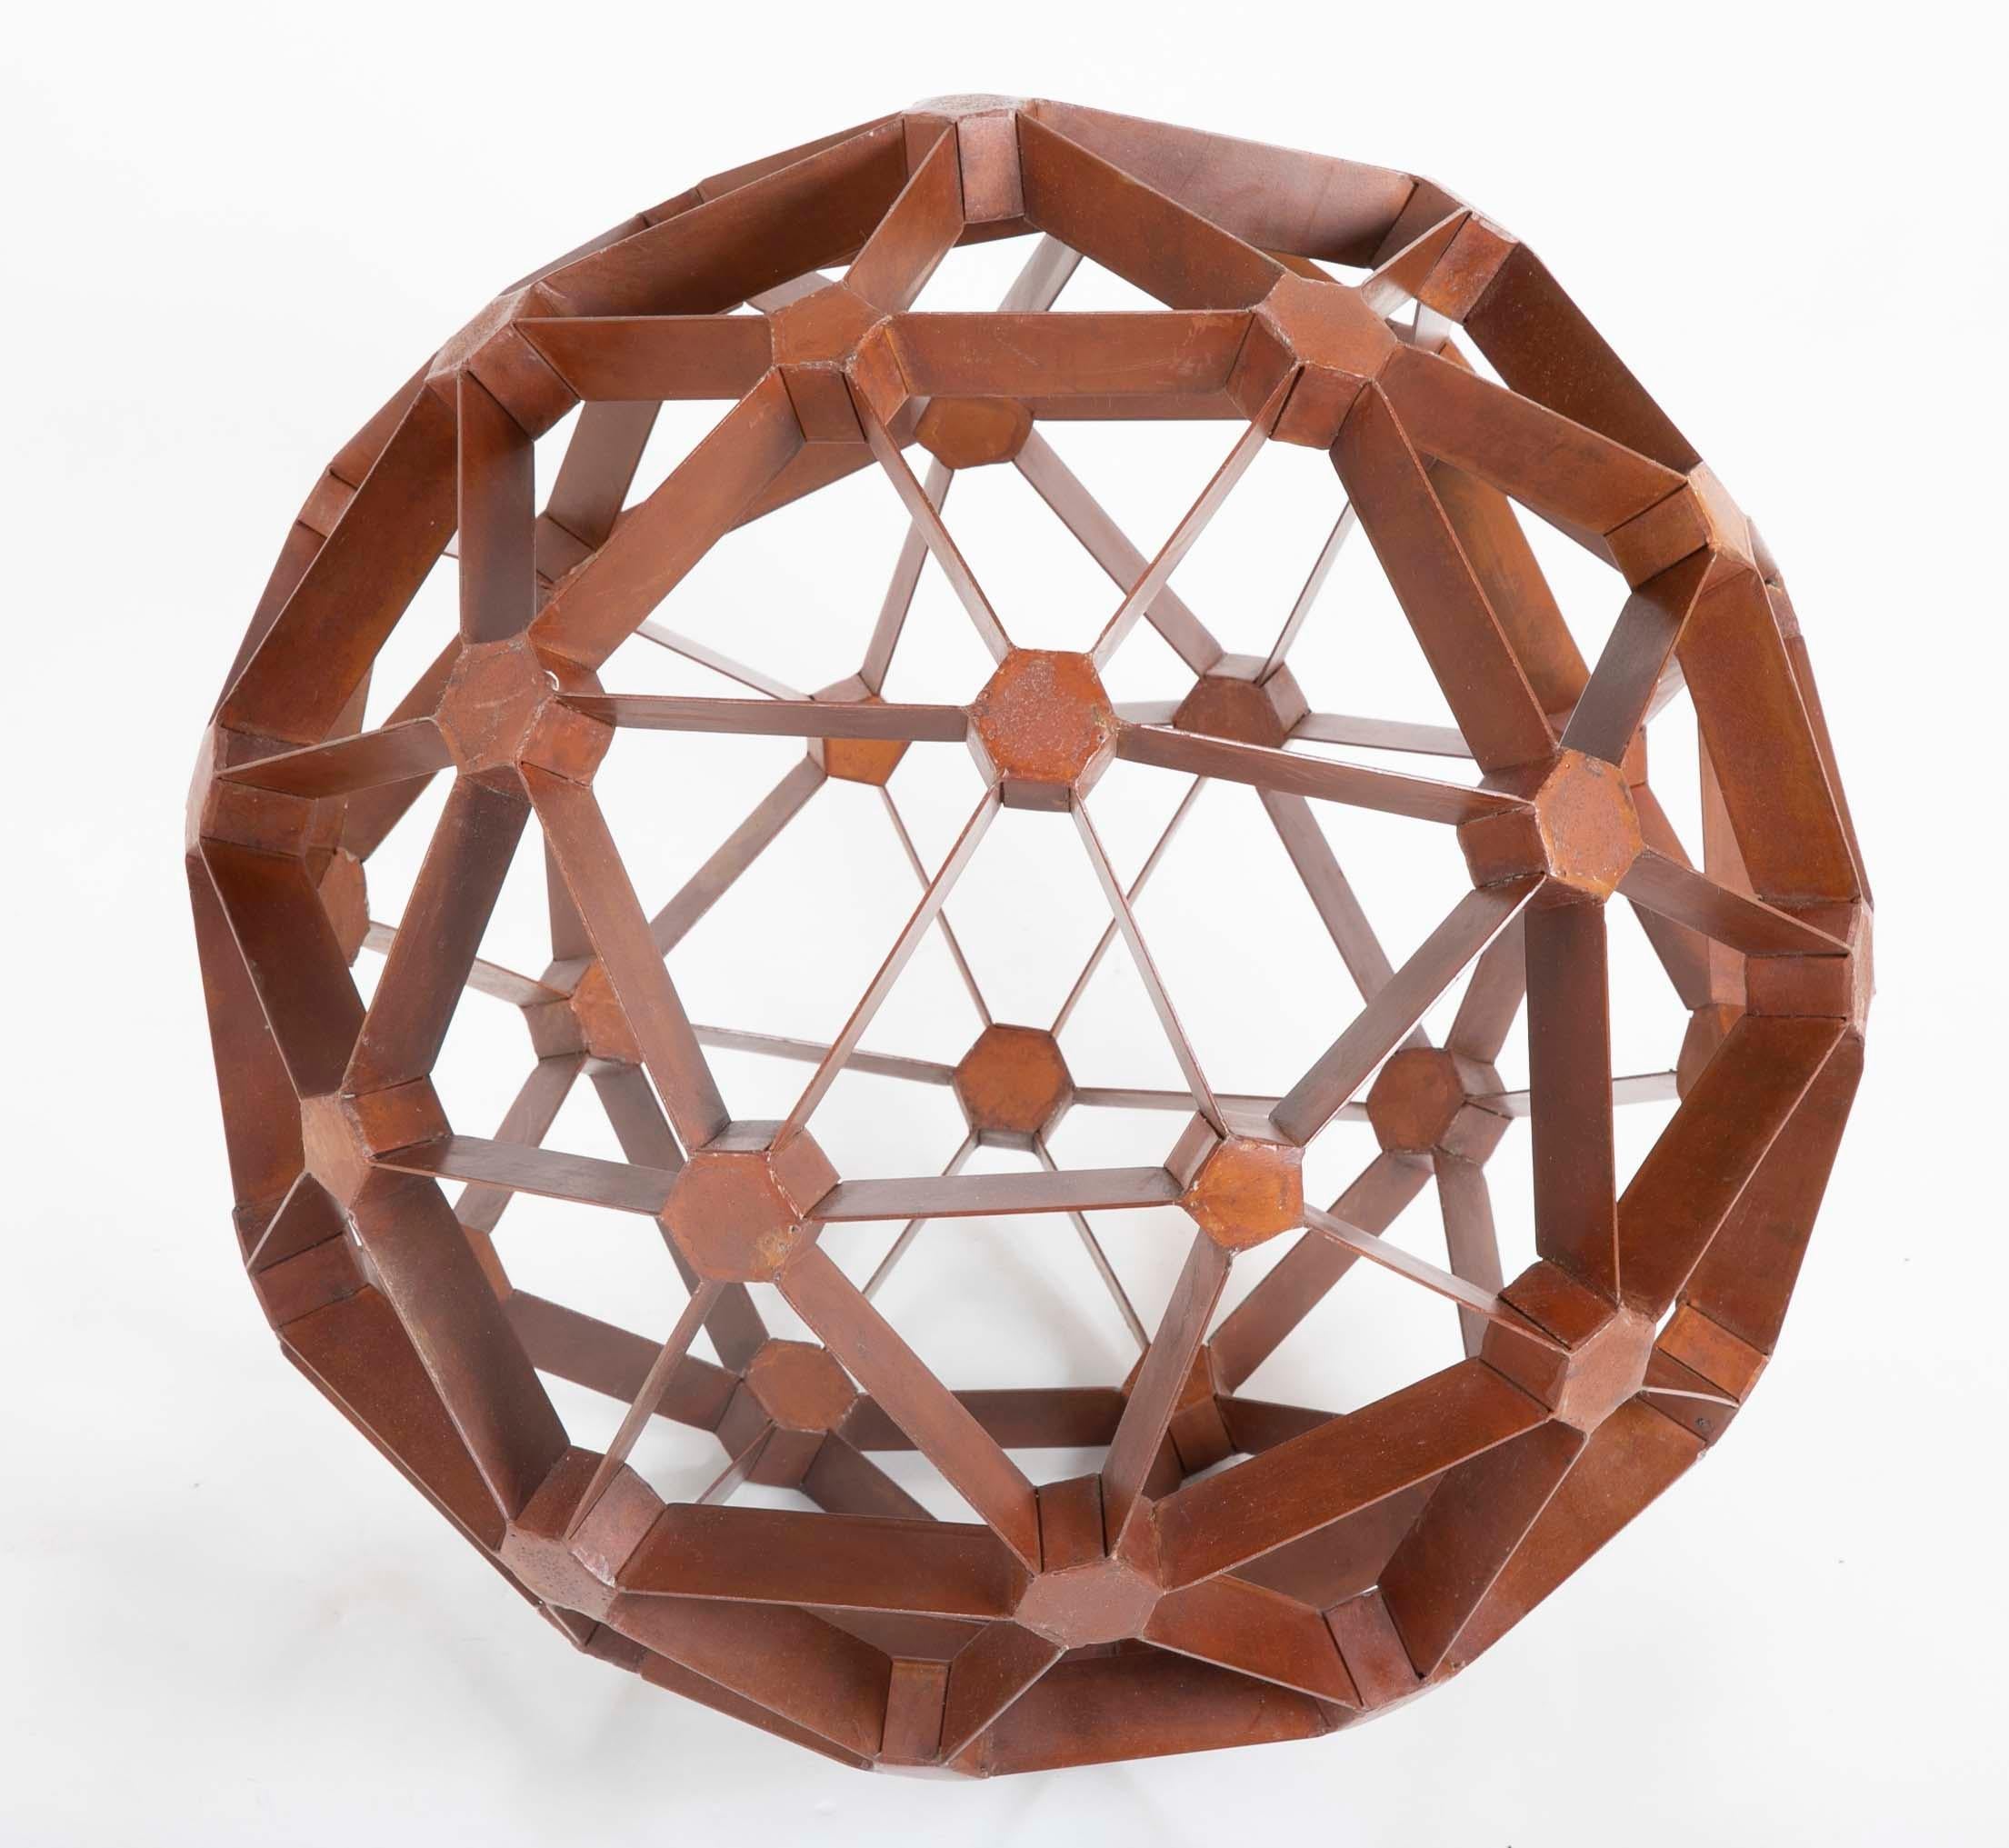 A geodesic sphere made of waxed steel in the manner of Buckmiester Fuller. A geodesic sphere or dome is a lightweight but very strong round structure made from interconnecting triangles. If the round structure is complete it's a geodesic sphere.